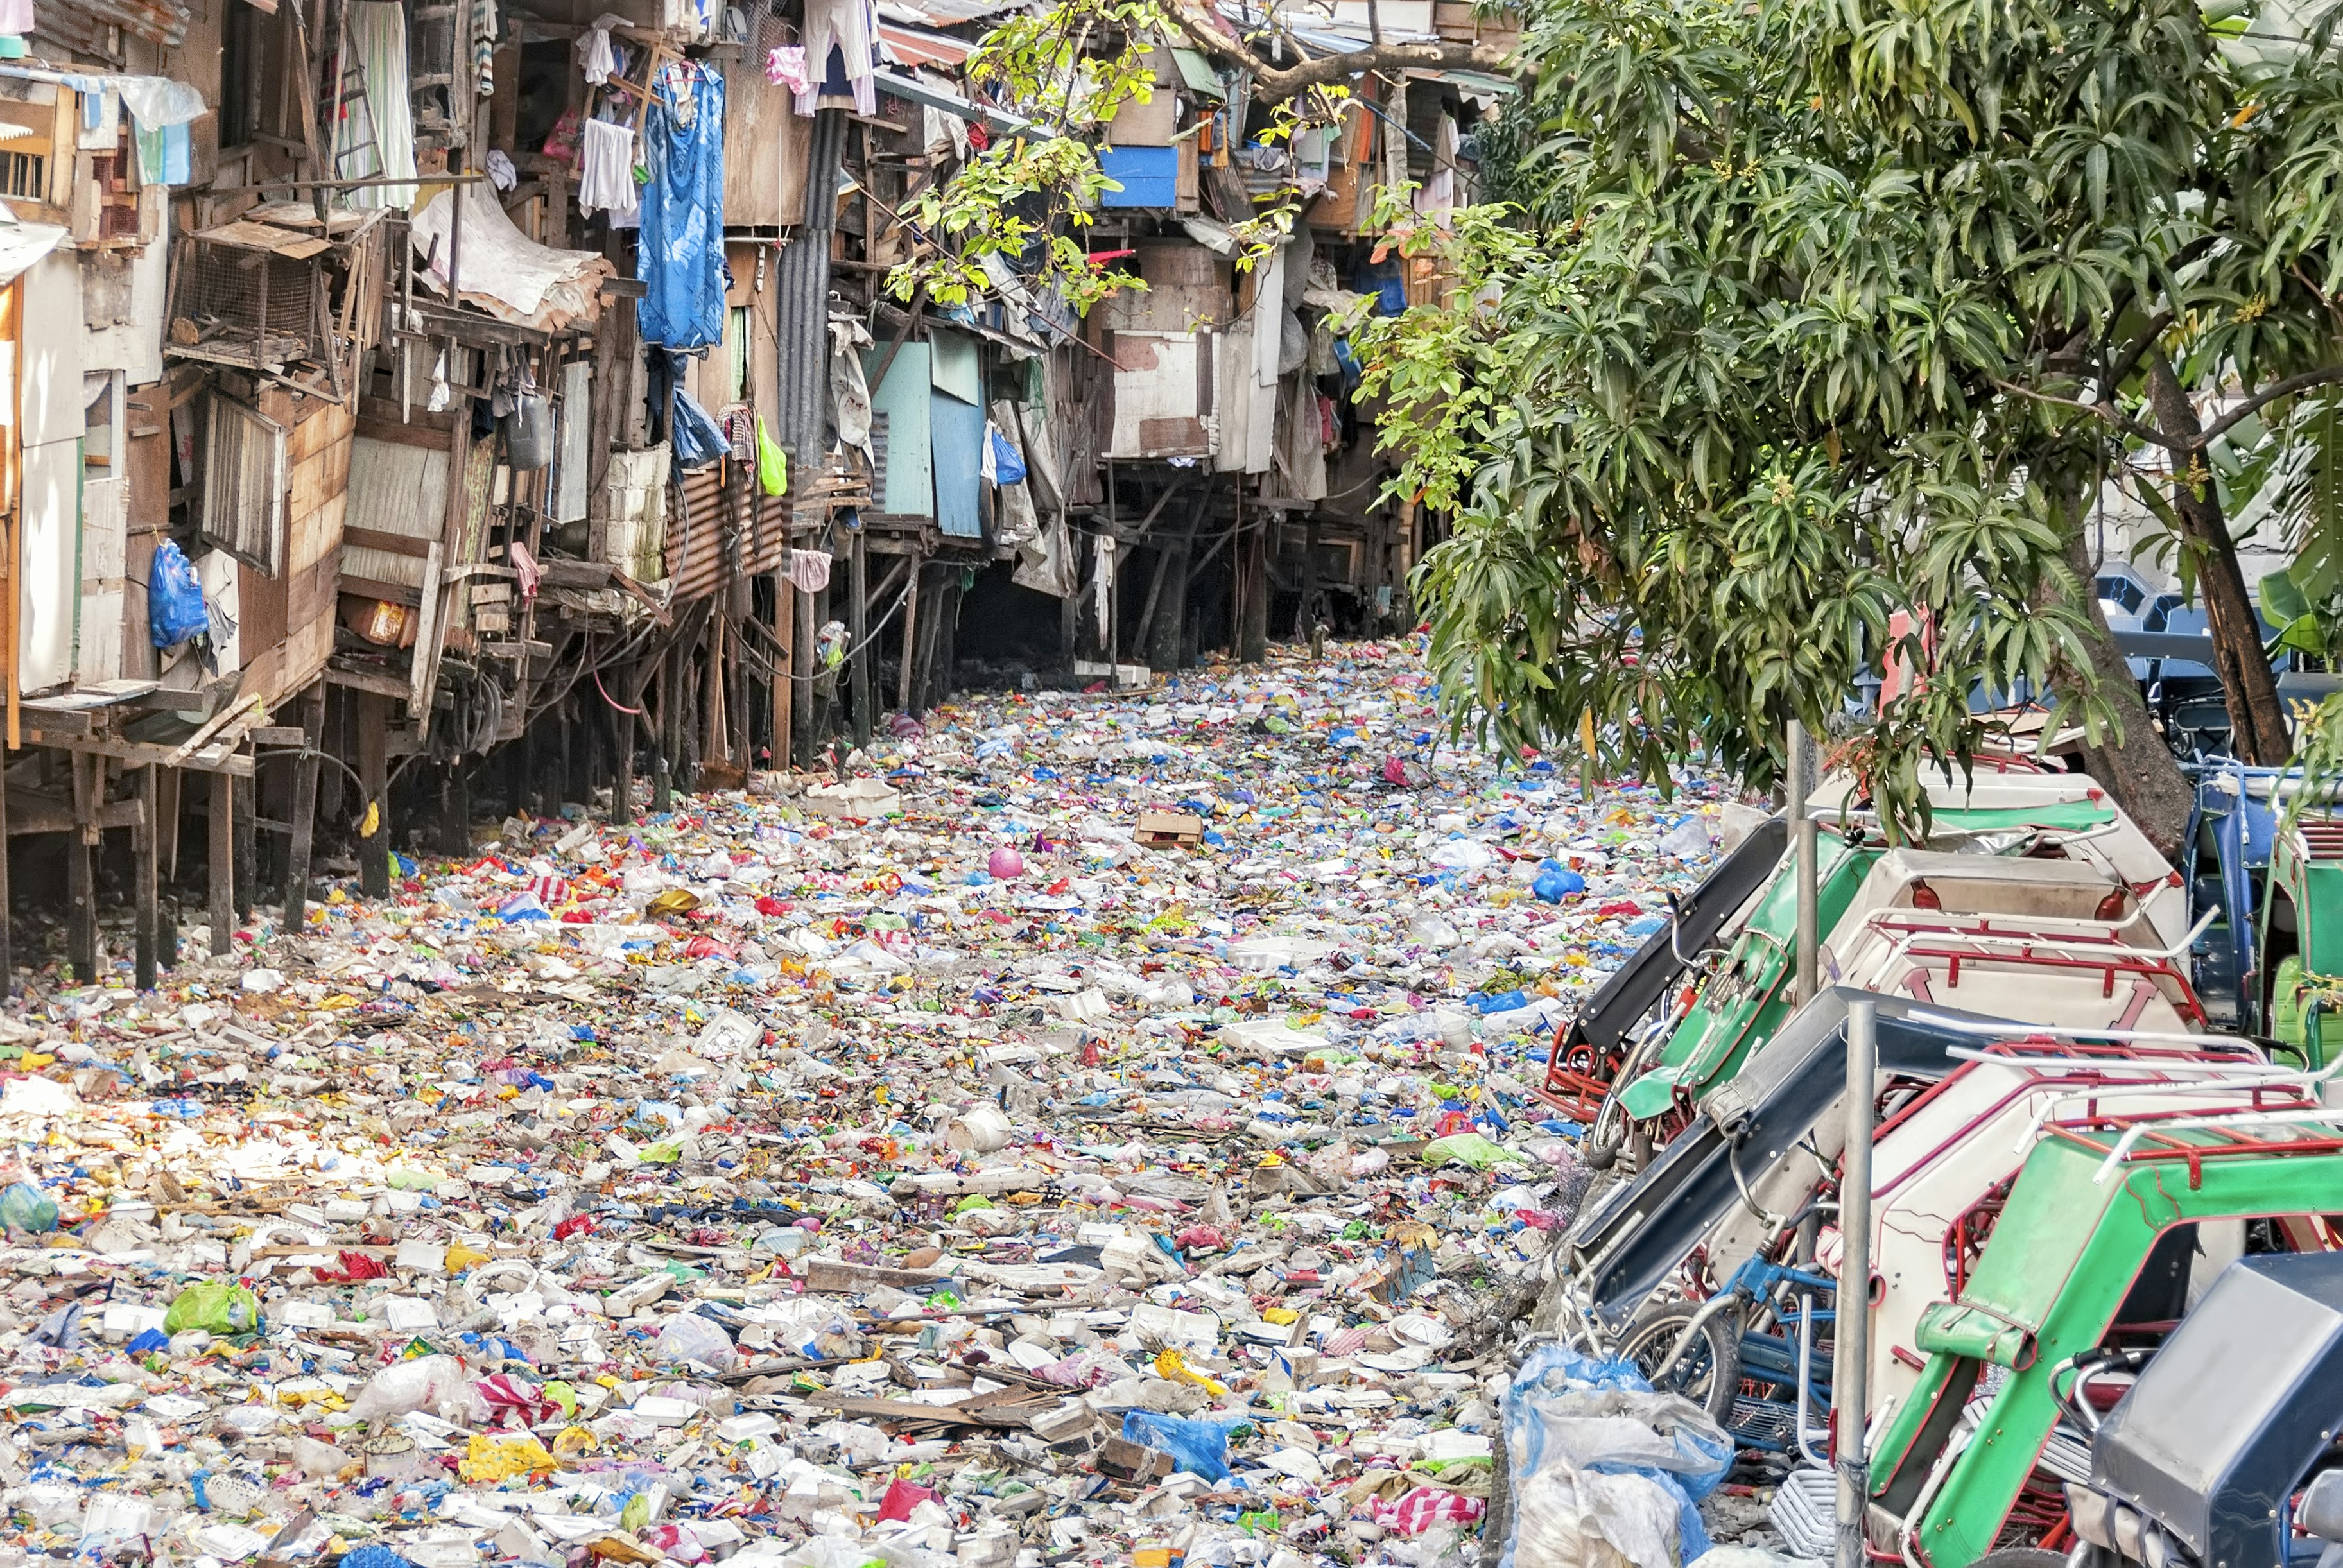 Shanties on stilts standing on garbage-filled river